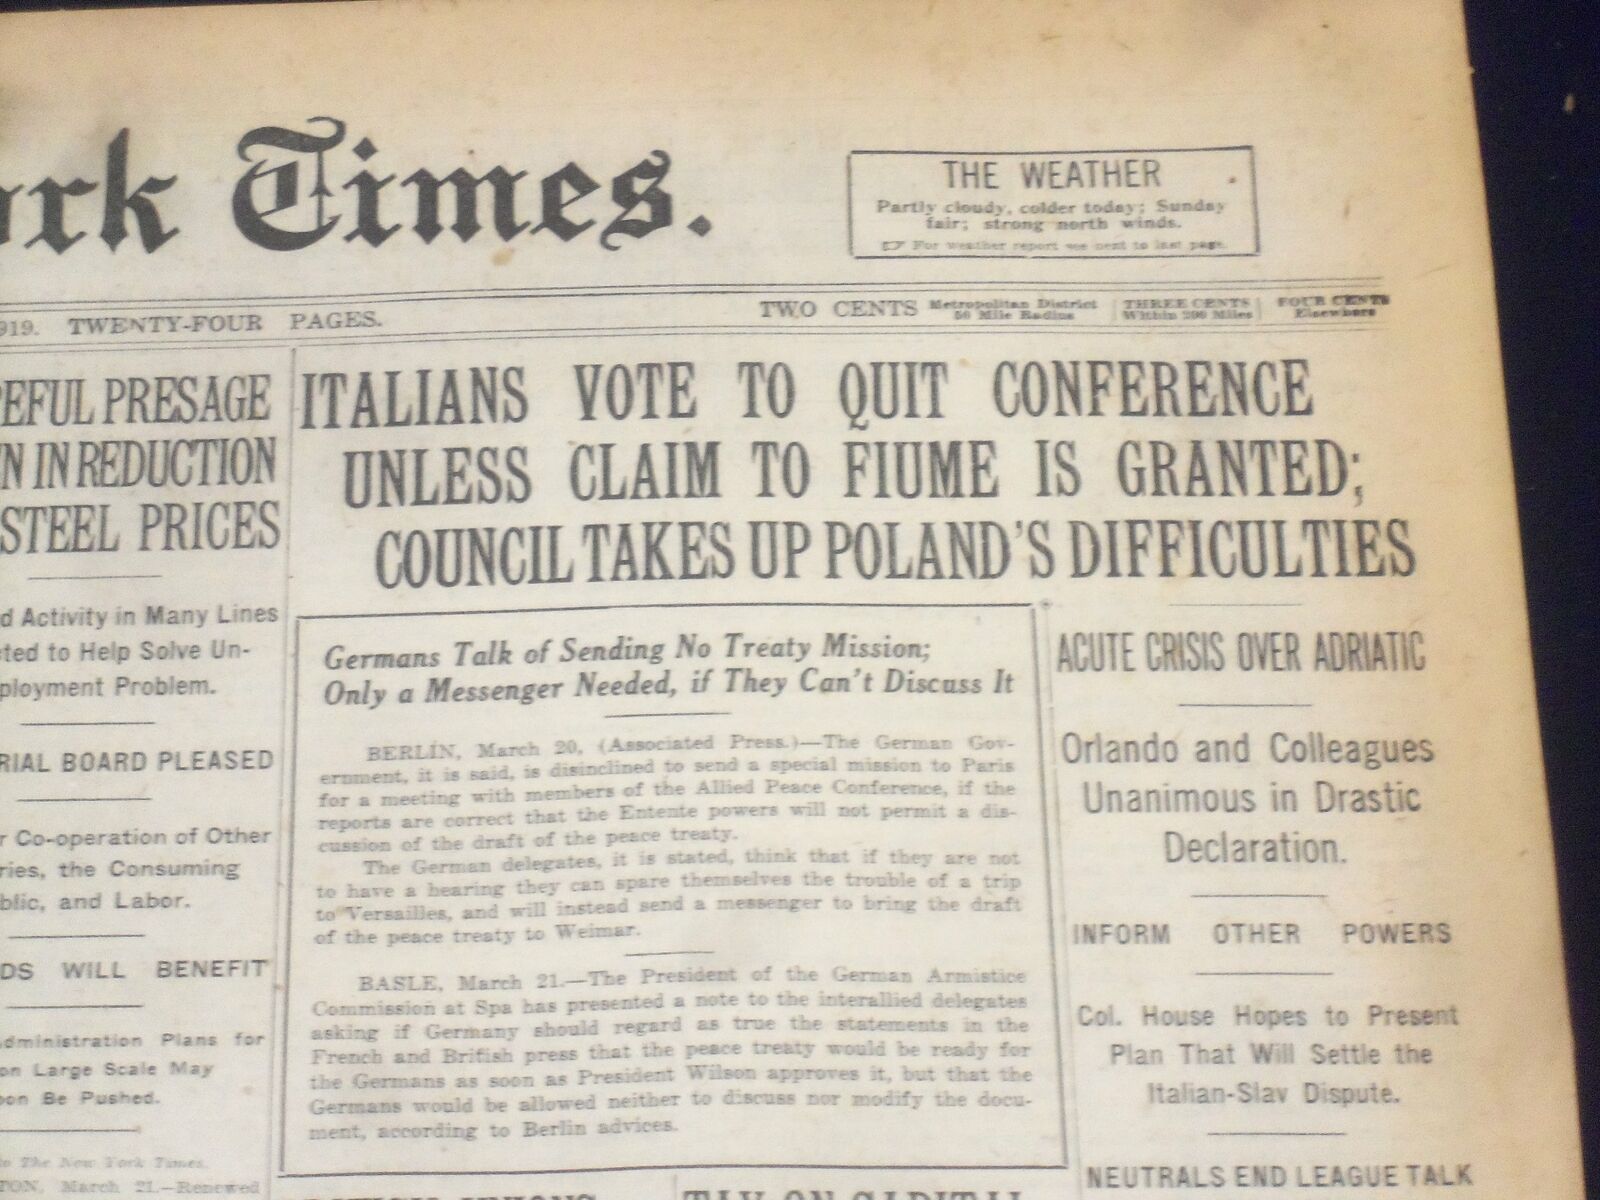 1919 MARCH 22 NEW YORK TIMES - ITALIANS VOTE TO QUIT CONFERENCE - NT 9286